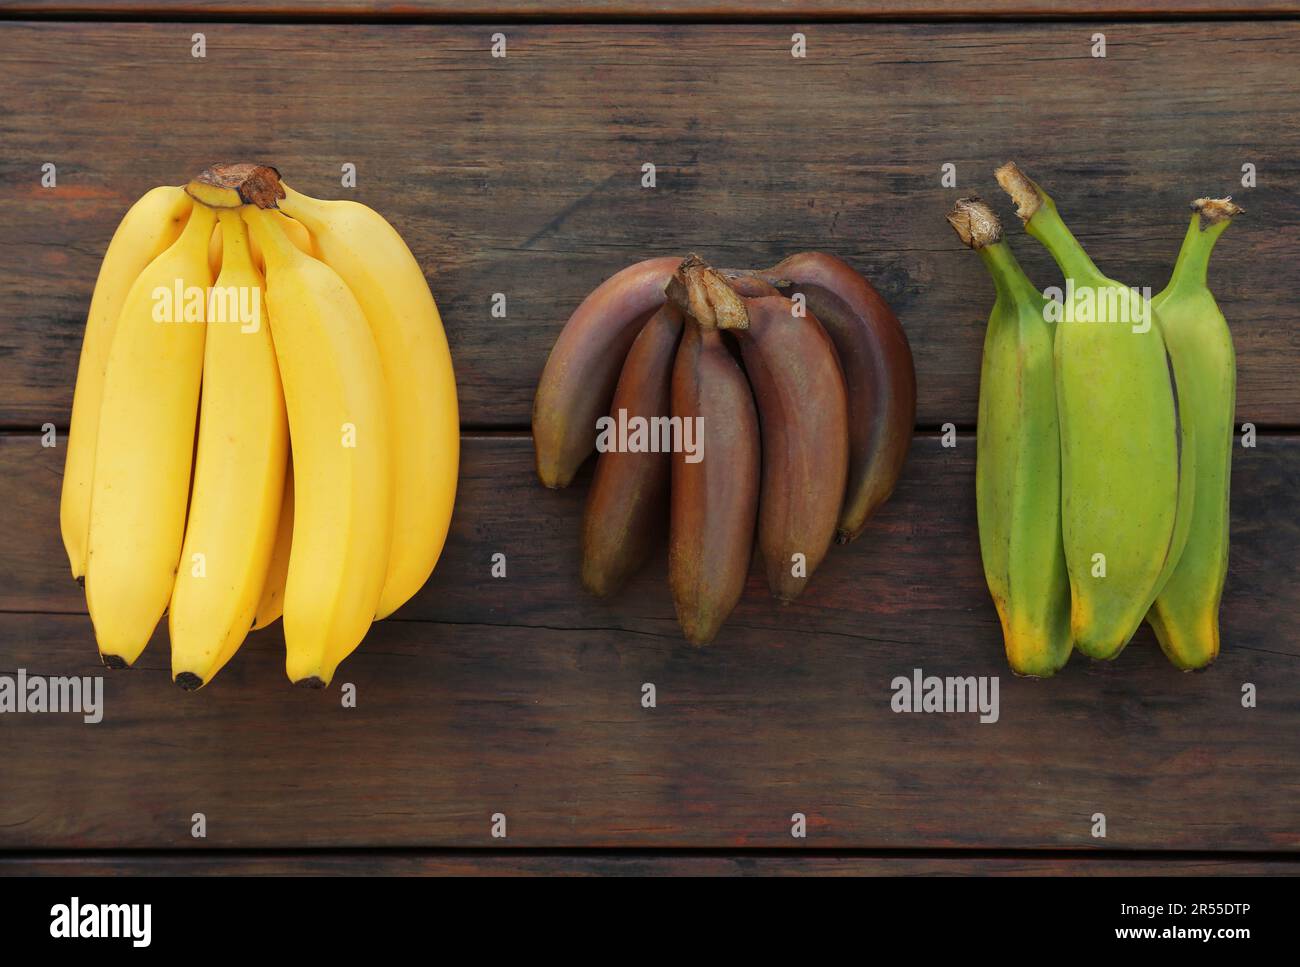 Different types of bananas on wooden table, flat lay Stock Photo